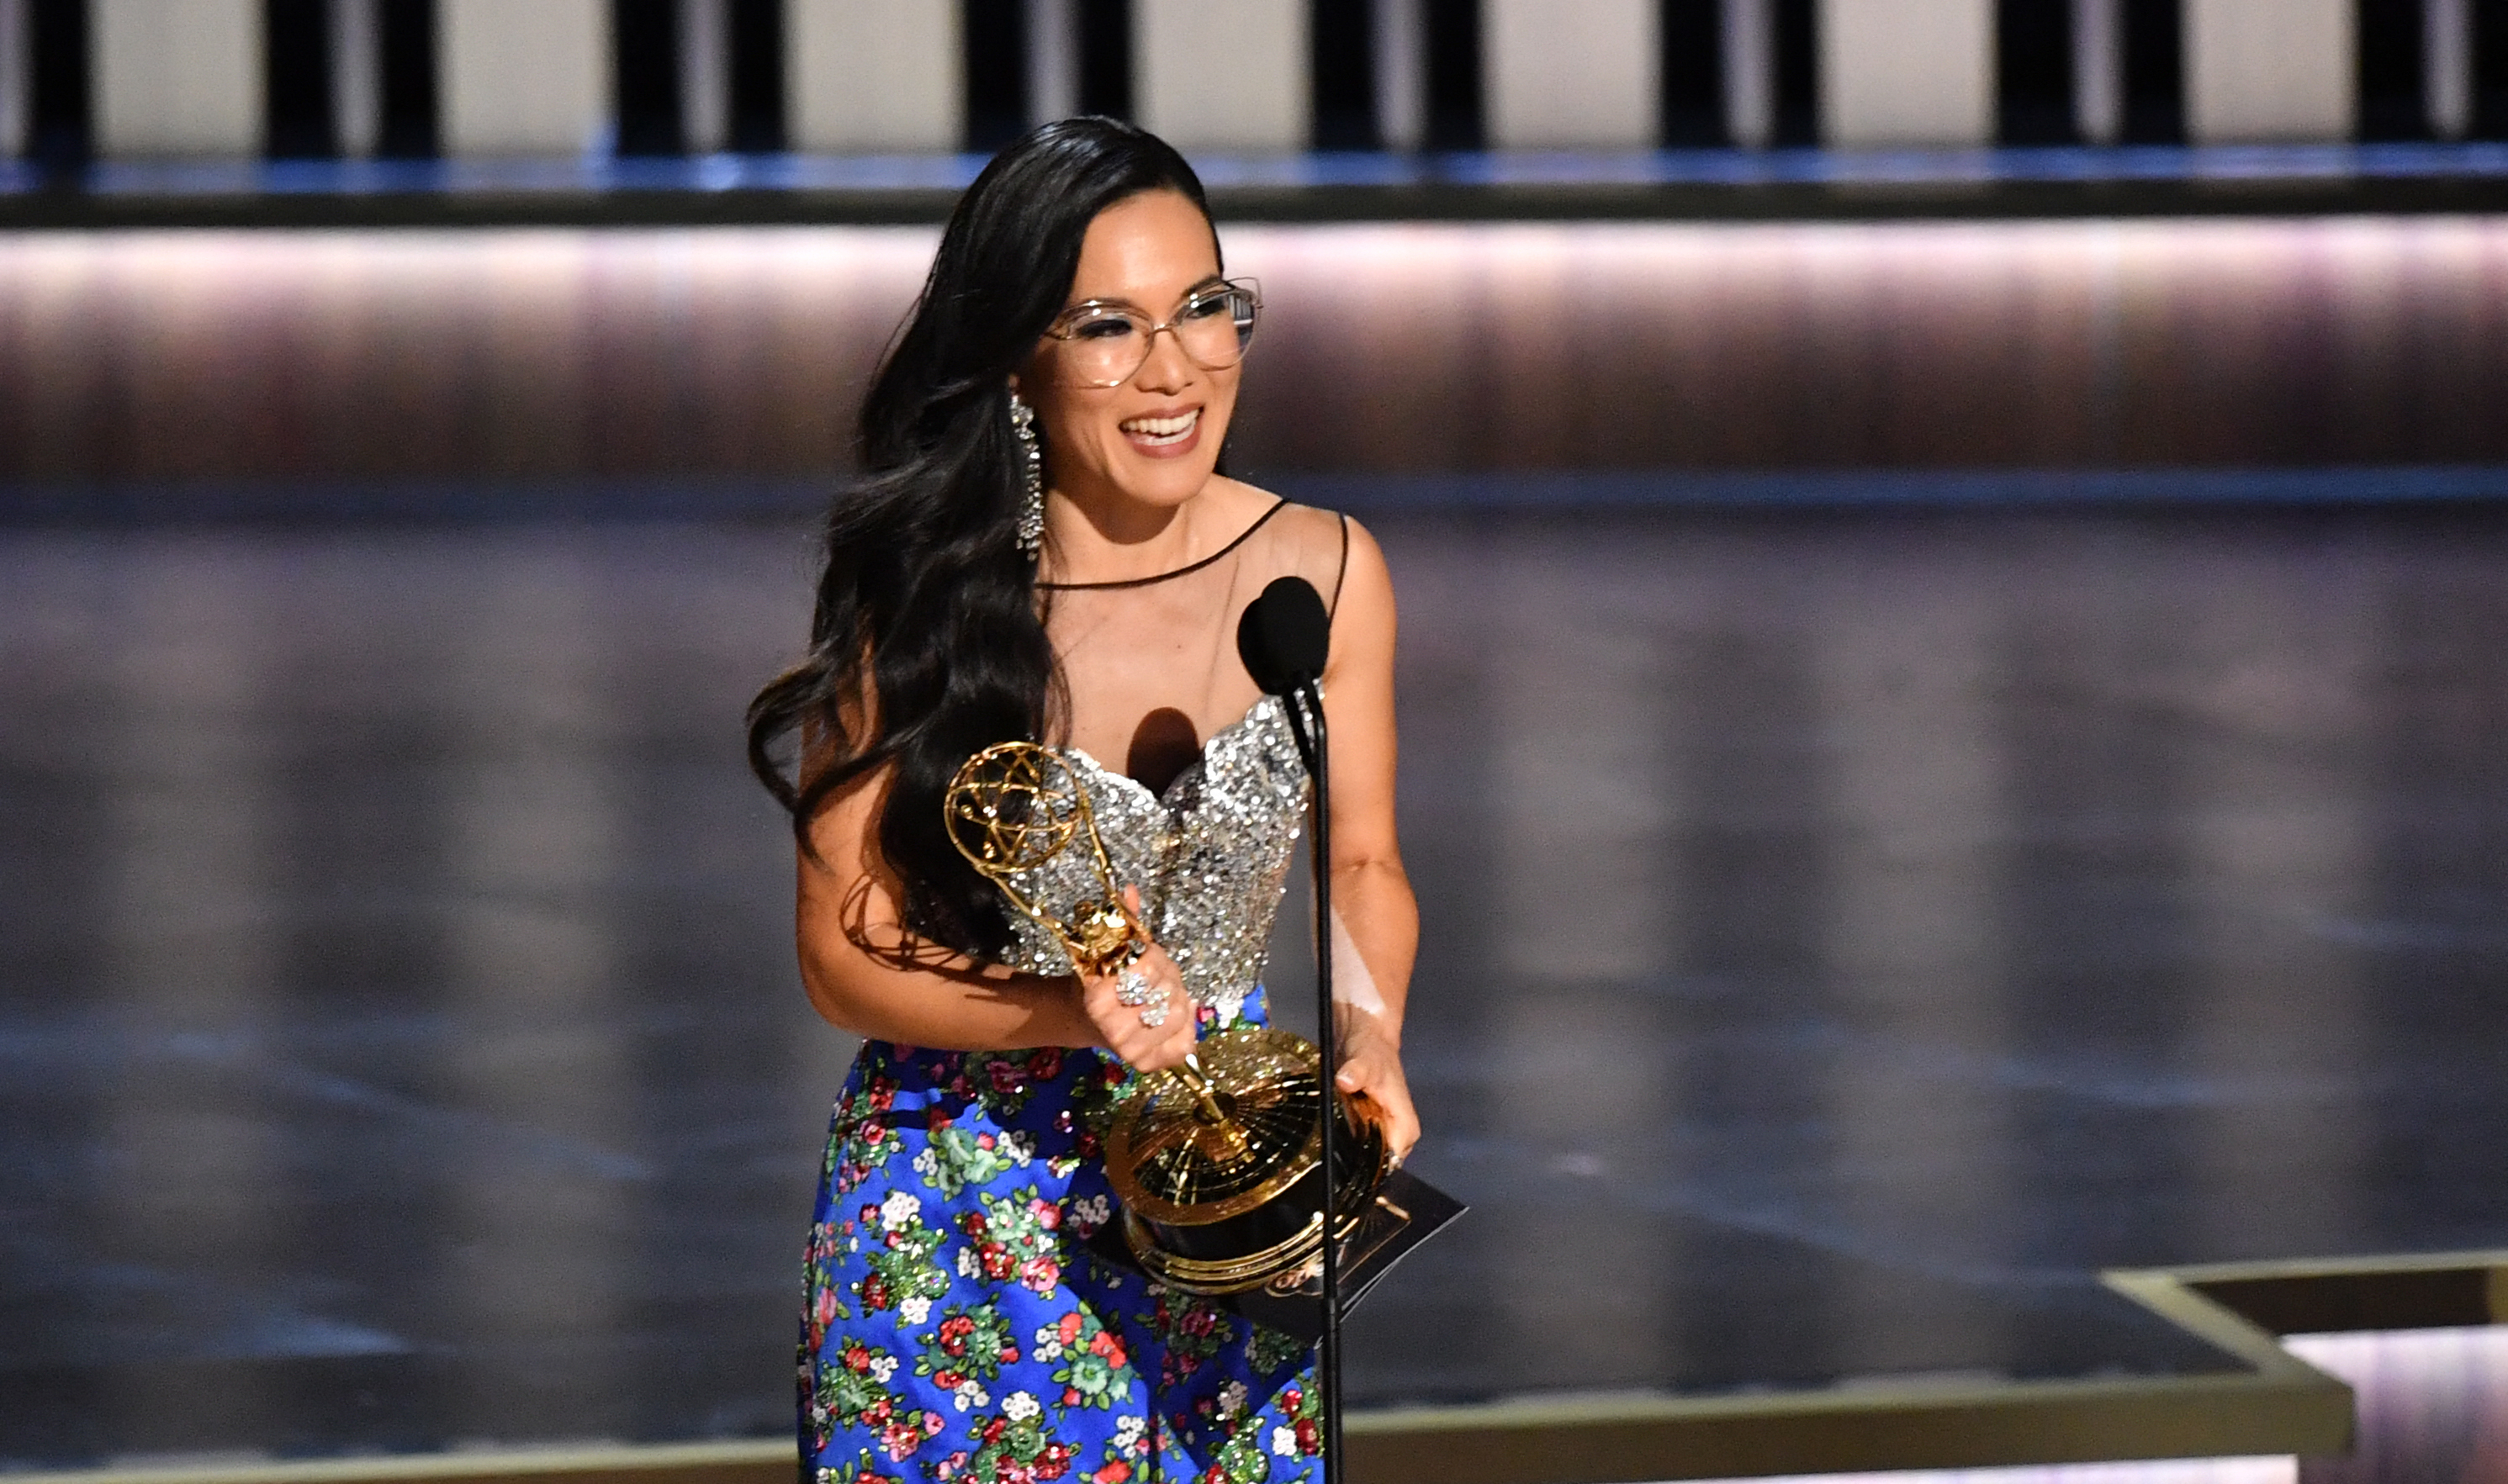 Ali Wong onstage accepting her Emmy award